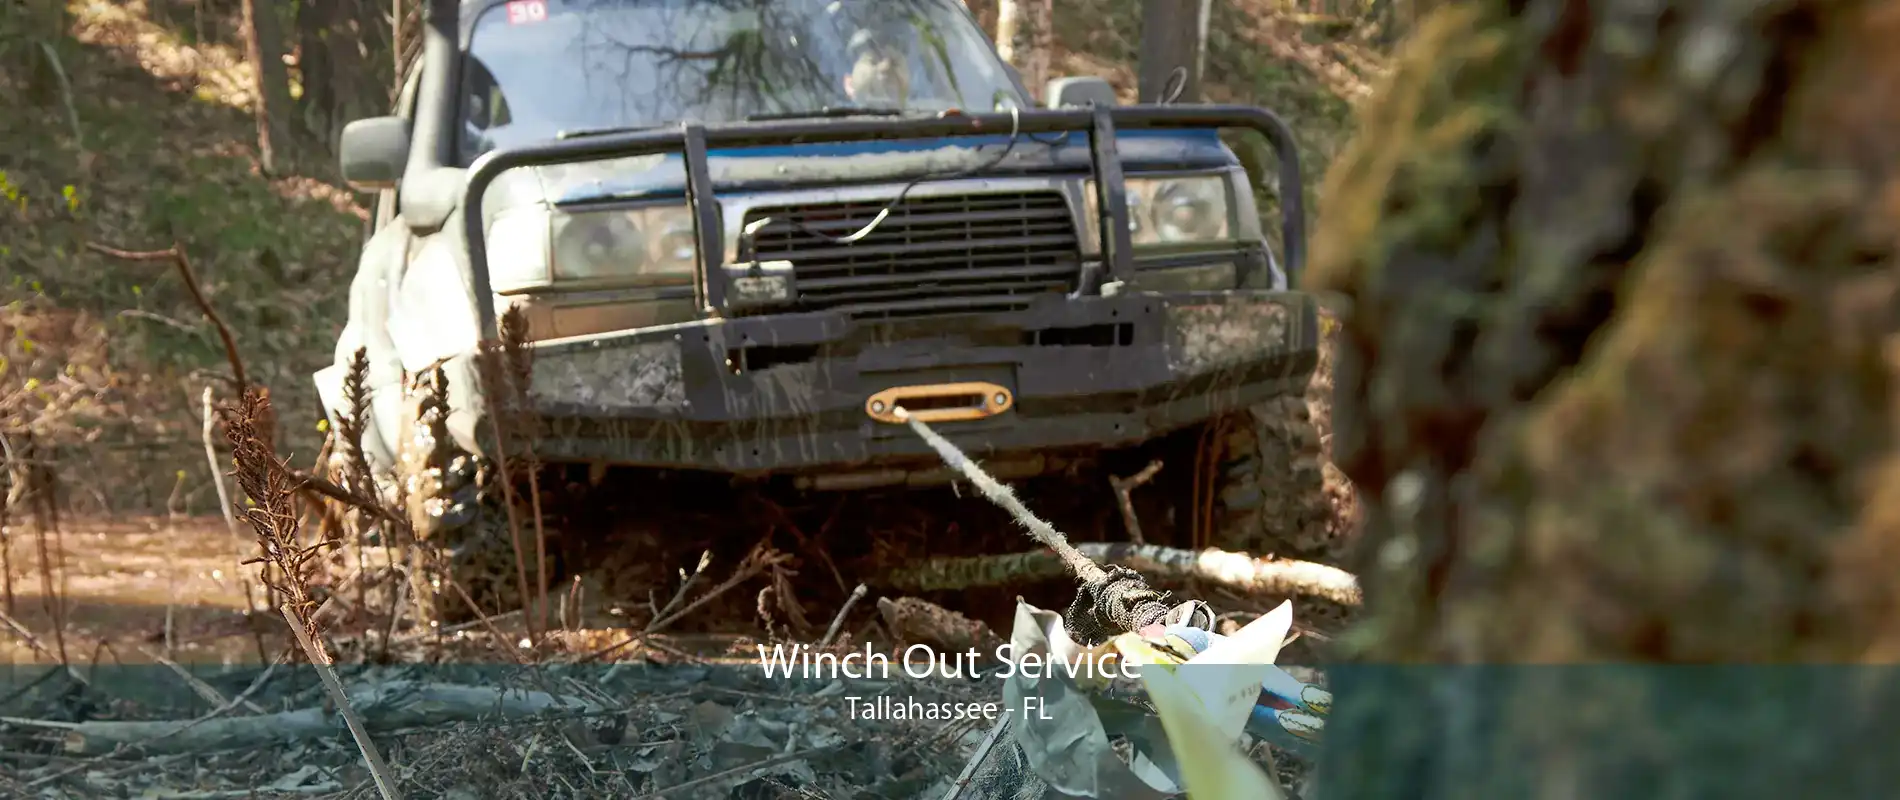 Winch Out Service Tallahassee - FL